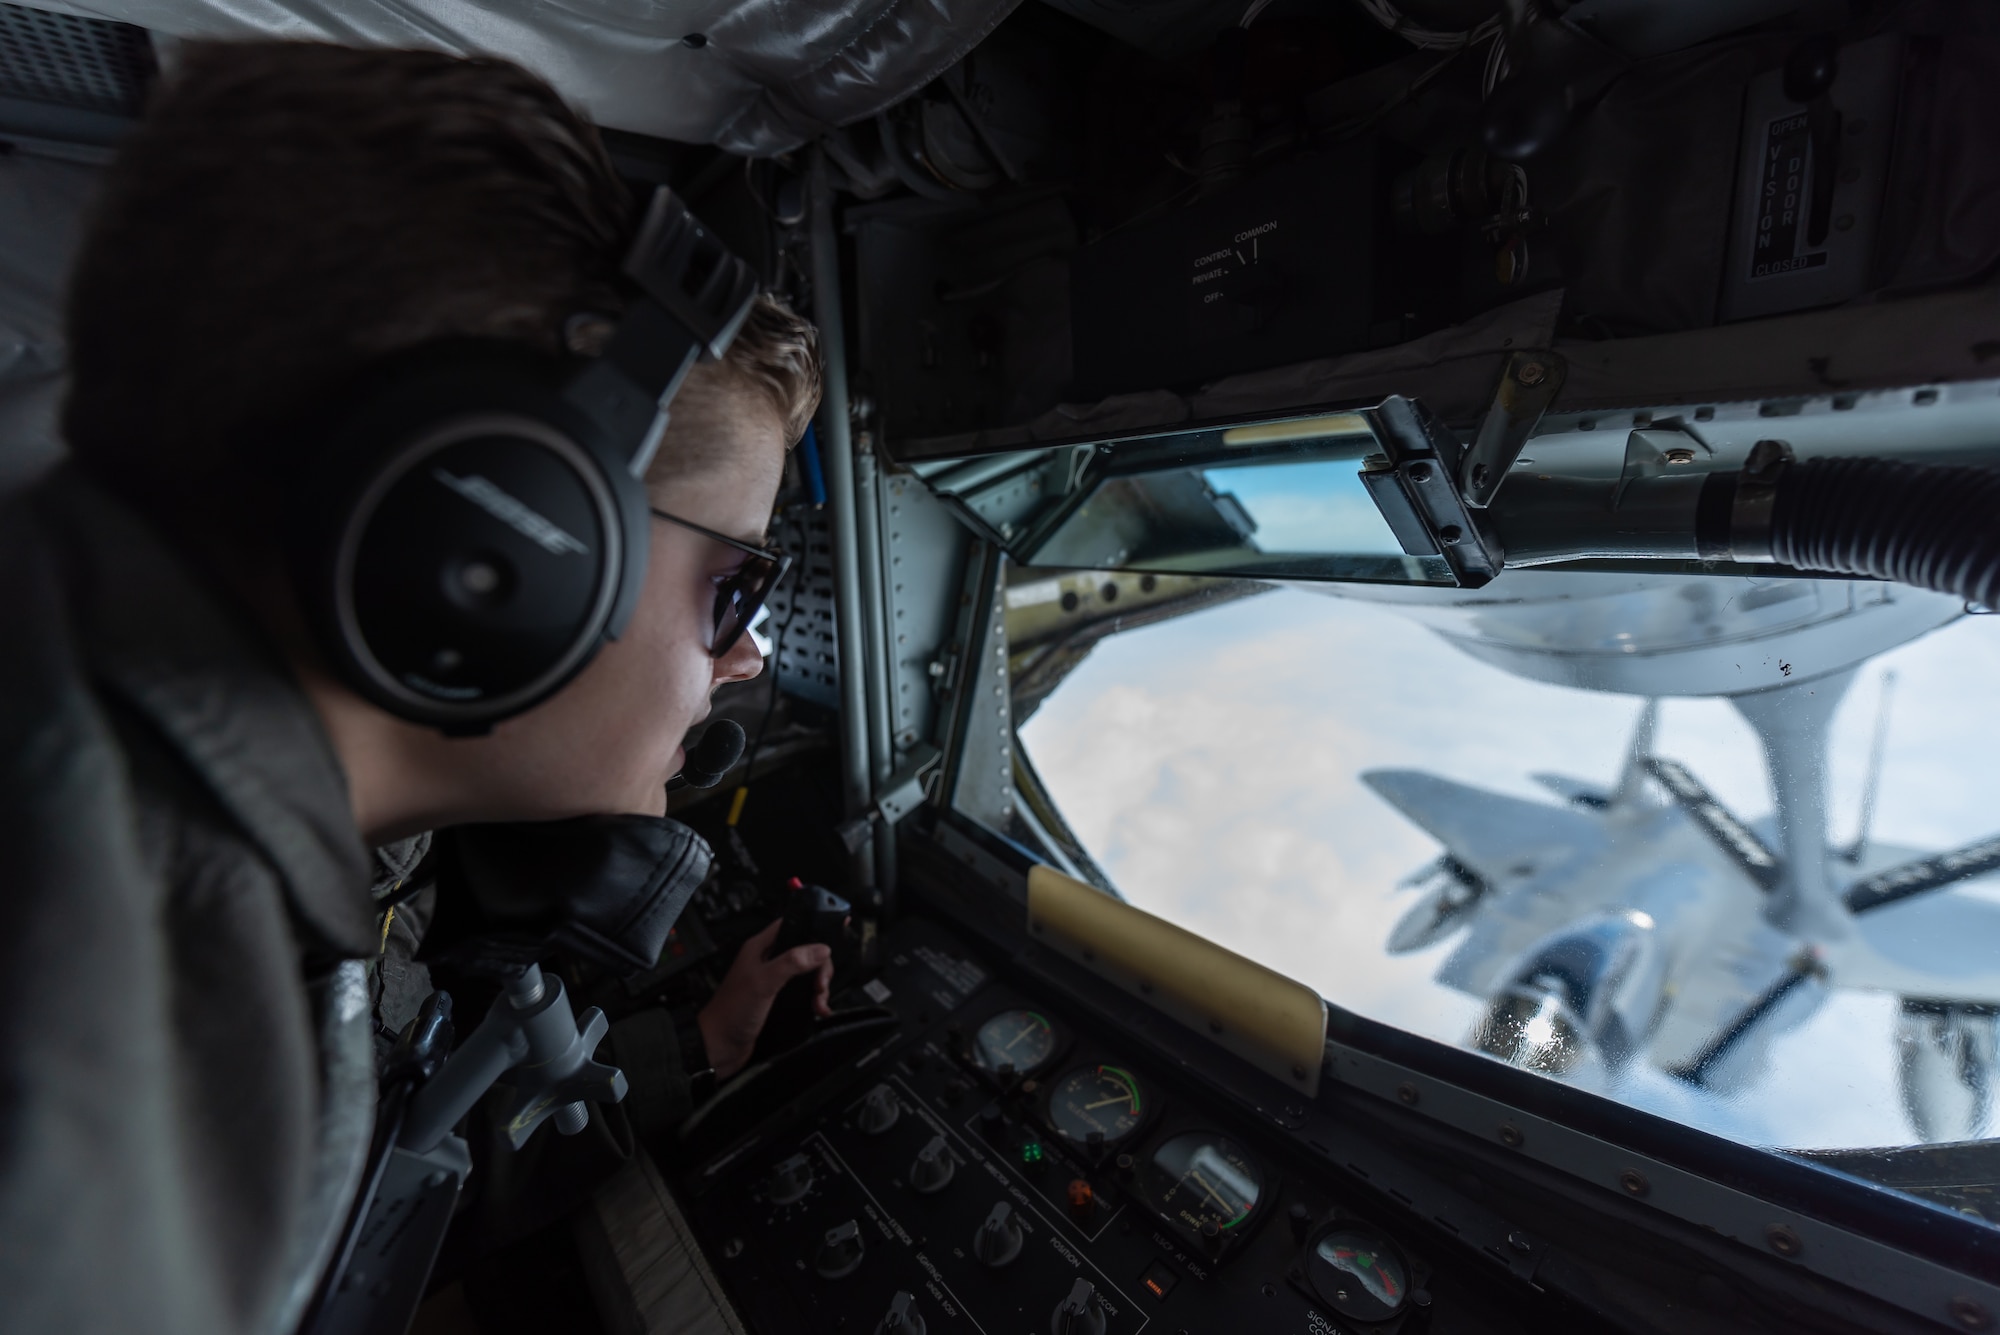 U.S. Air Force Airman 1st Class Brooke Griffin, 909th Air Refueling Squadron boom operator, refuels an F-15C Eagle April 15, 2019, during a routine training exercise out of Kadena Air Base, Japan. The 909th ARS helps ensure a free-and-open Indo-Pacific by providing air refueling to U.S., allies and partners within the area of responsibility. (U.S. Air Force photo by Airman 1st Class Matthew Seefeldt)